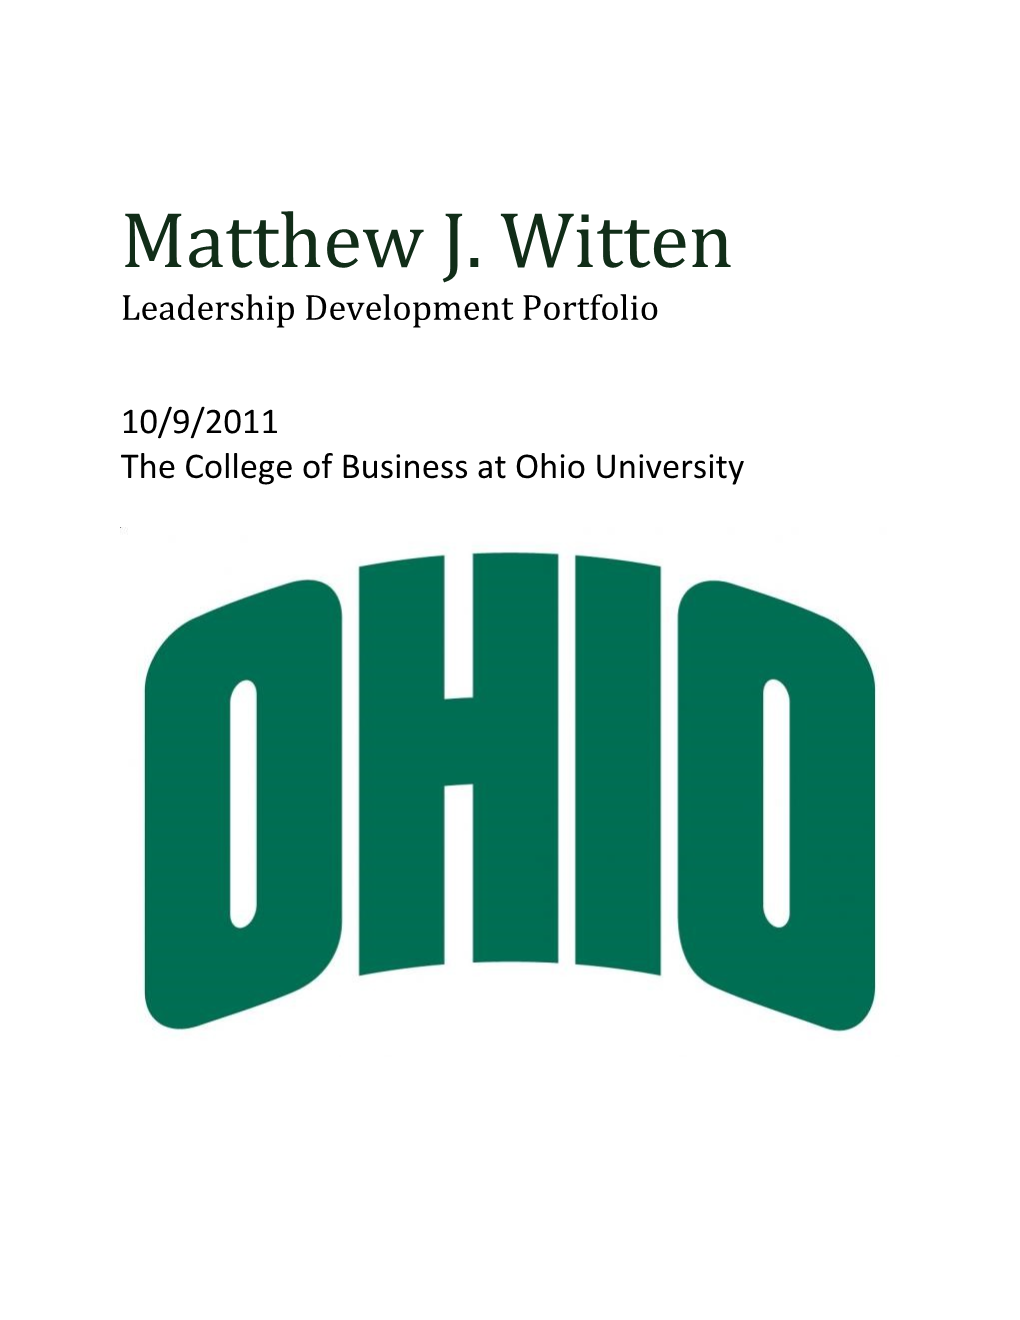 The College of Business at Ohio University